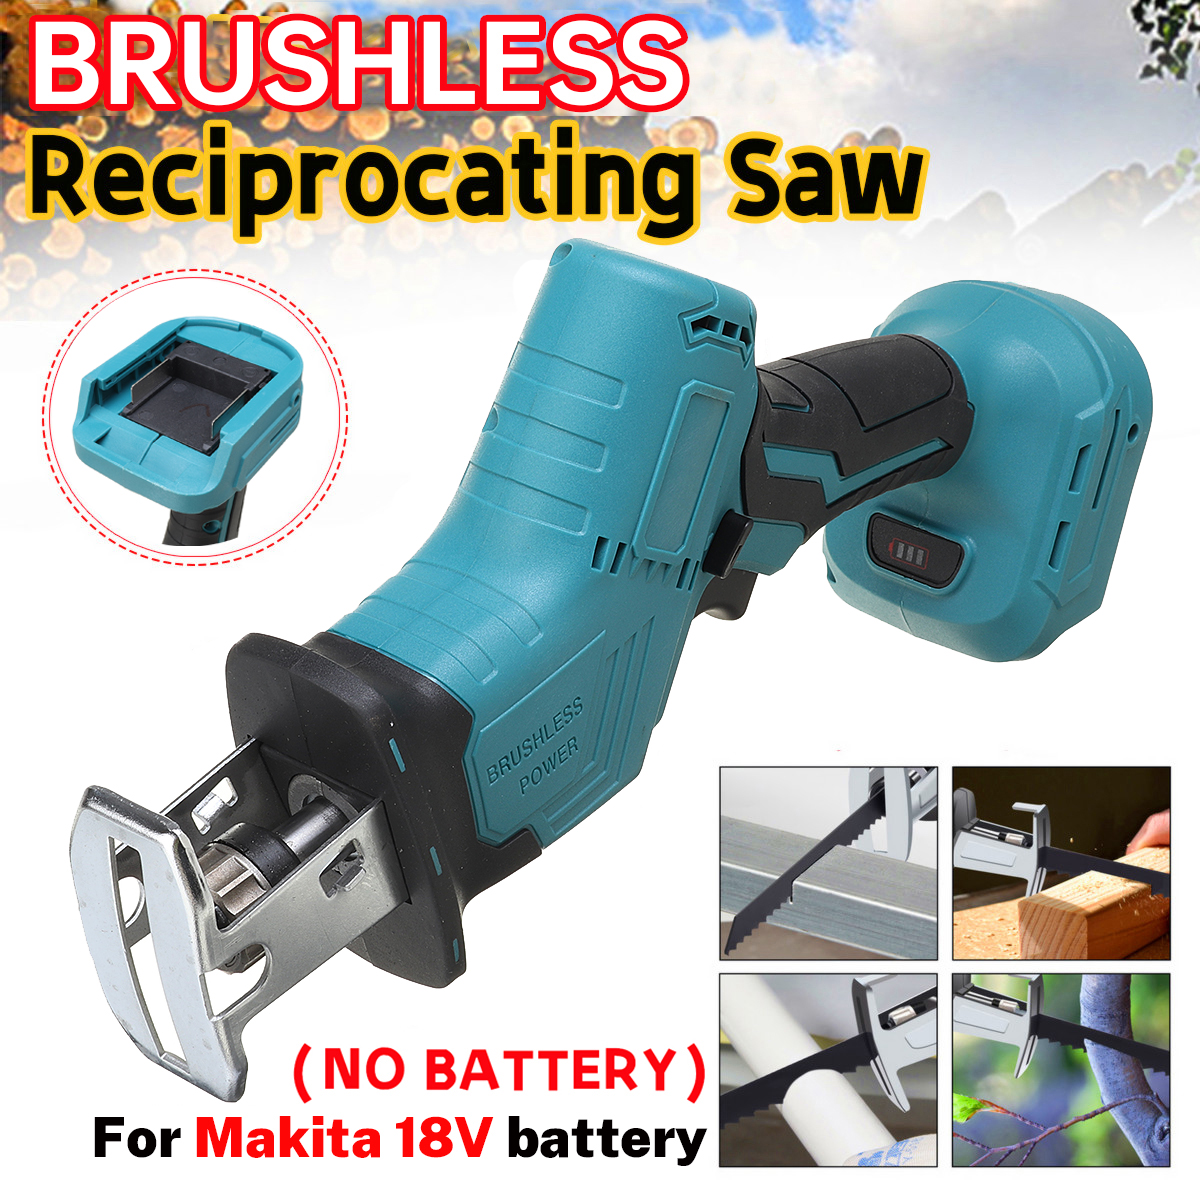 Rechargeable-Reciprocating-Saw-Brushless-Electric-Saw-For-Makita-Battery-Woodworking-Wood-Plastic-Ir-1886209-1